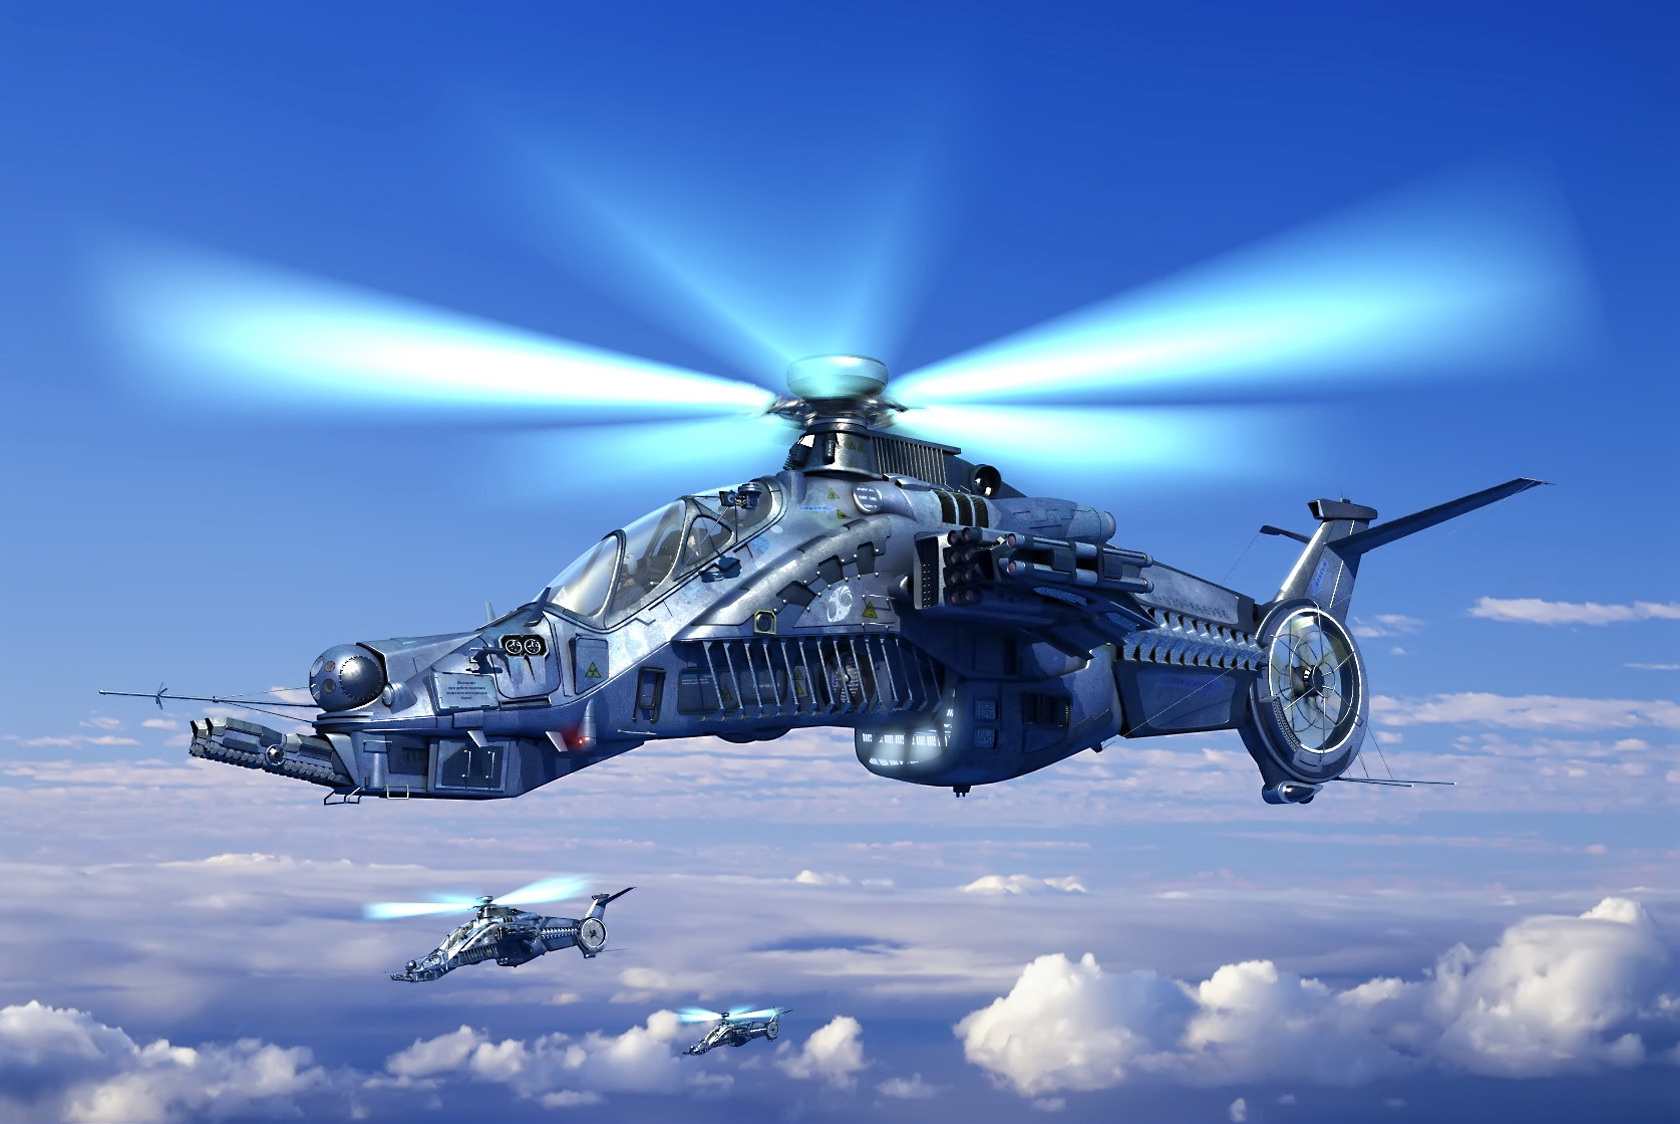 Wallpaper Helicopter Aviation